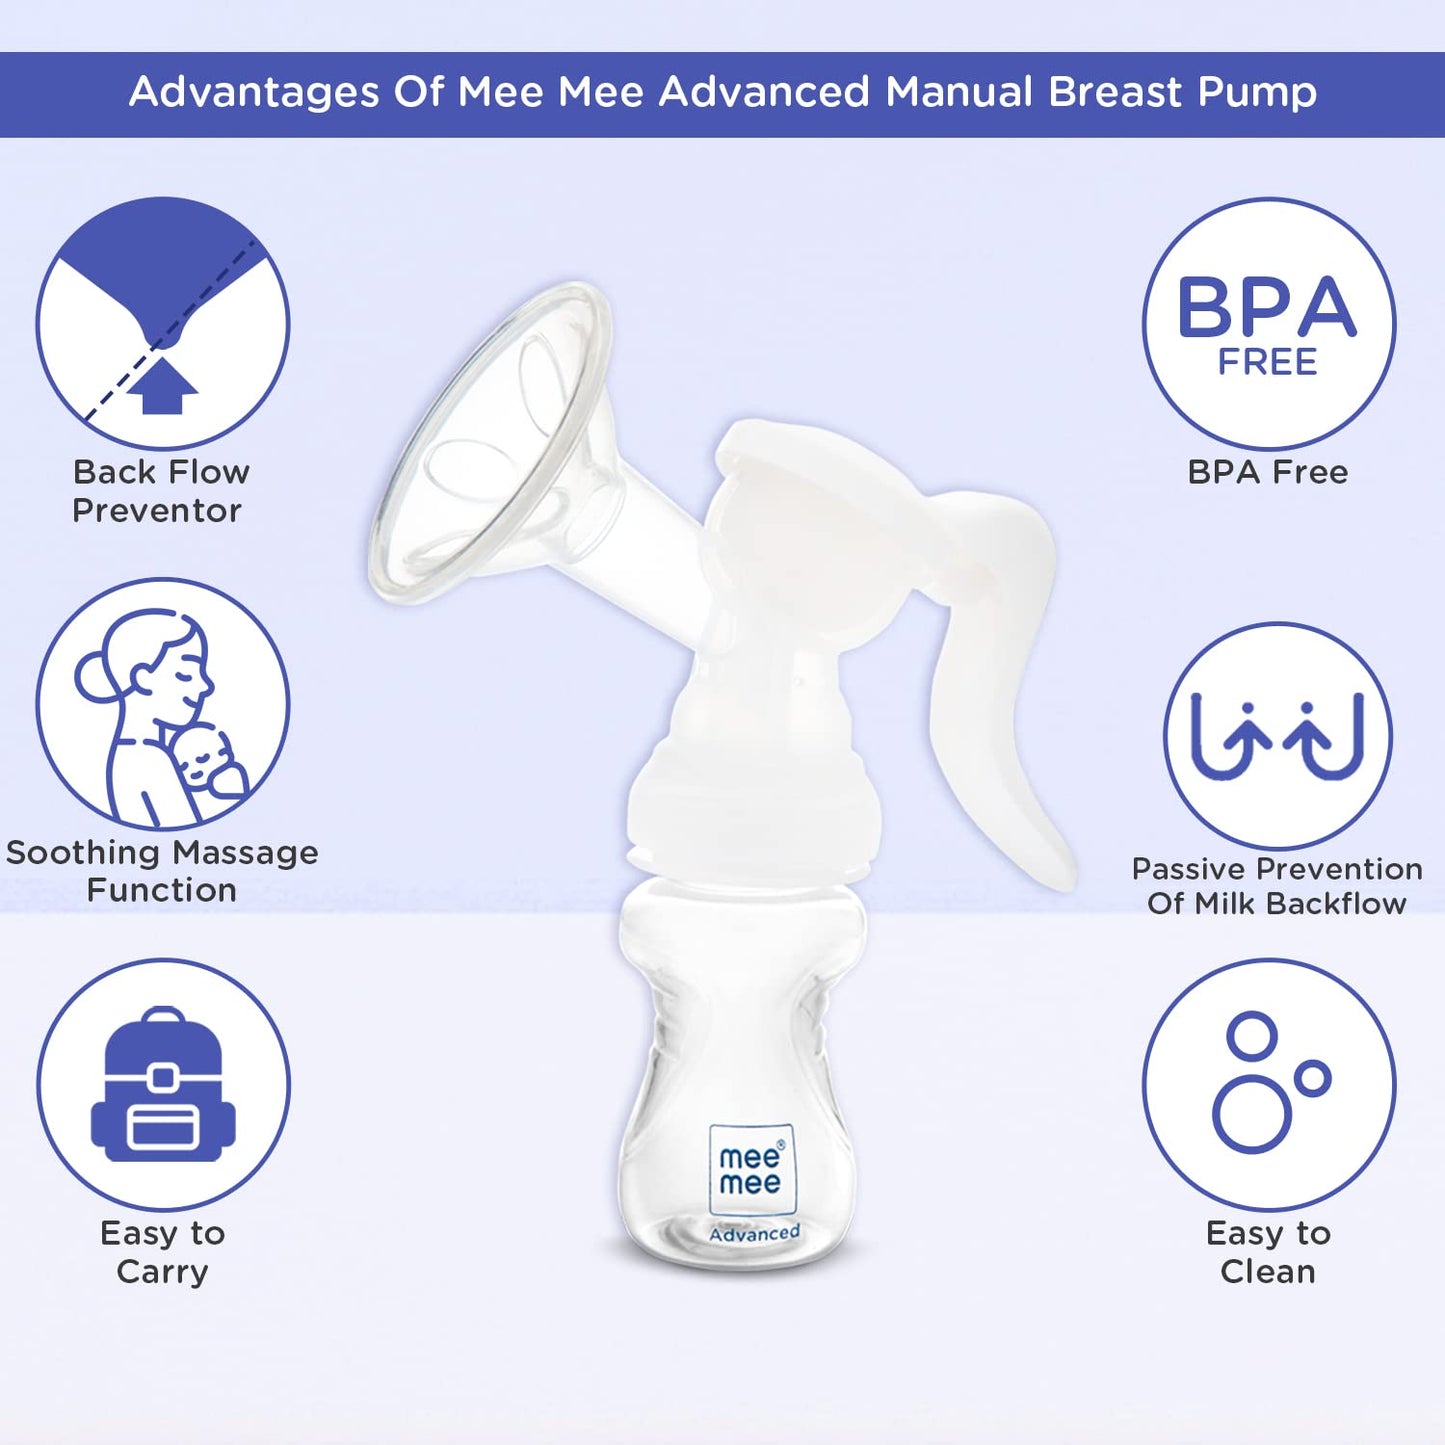 Mee Mee Advanced Manual Breast Pump with 180° Rotating Handle